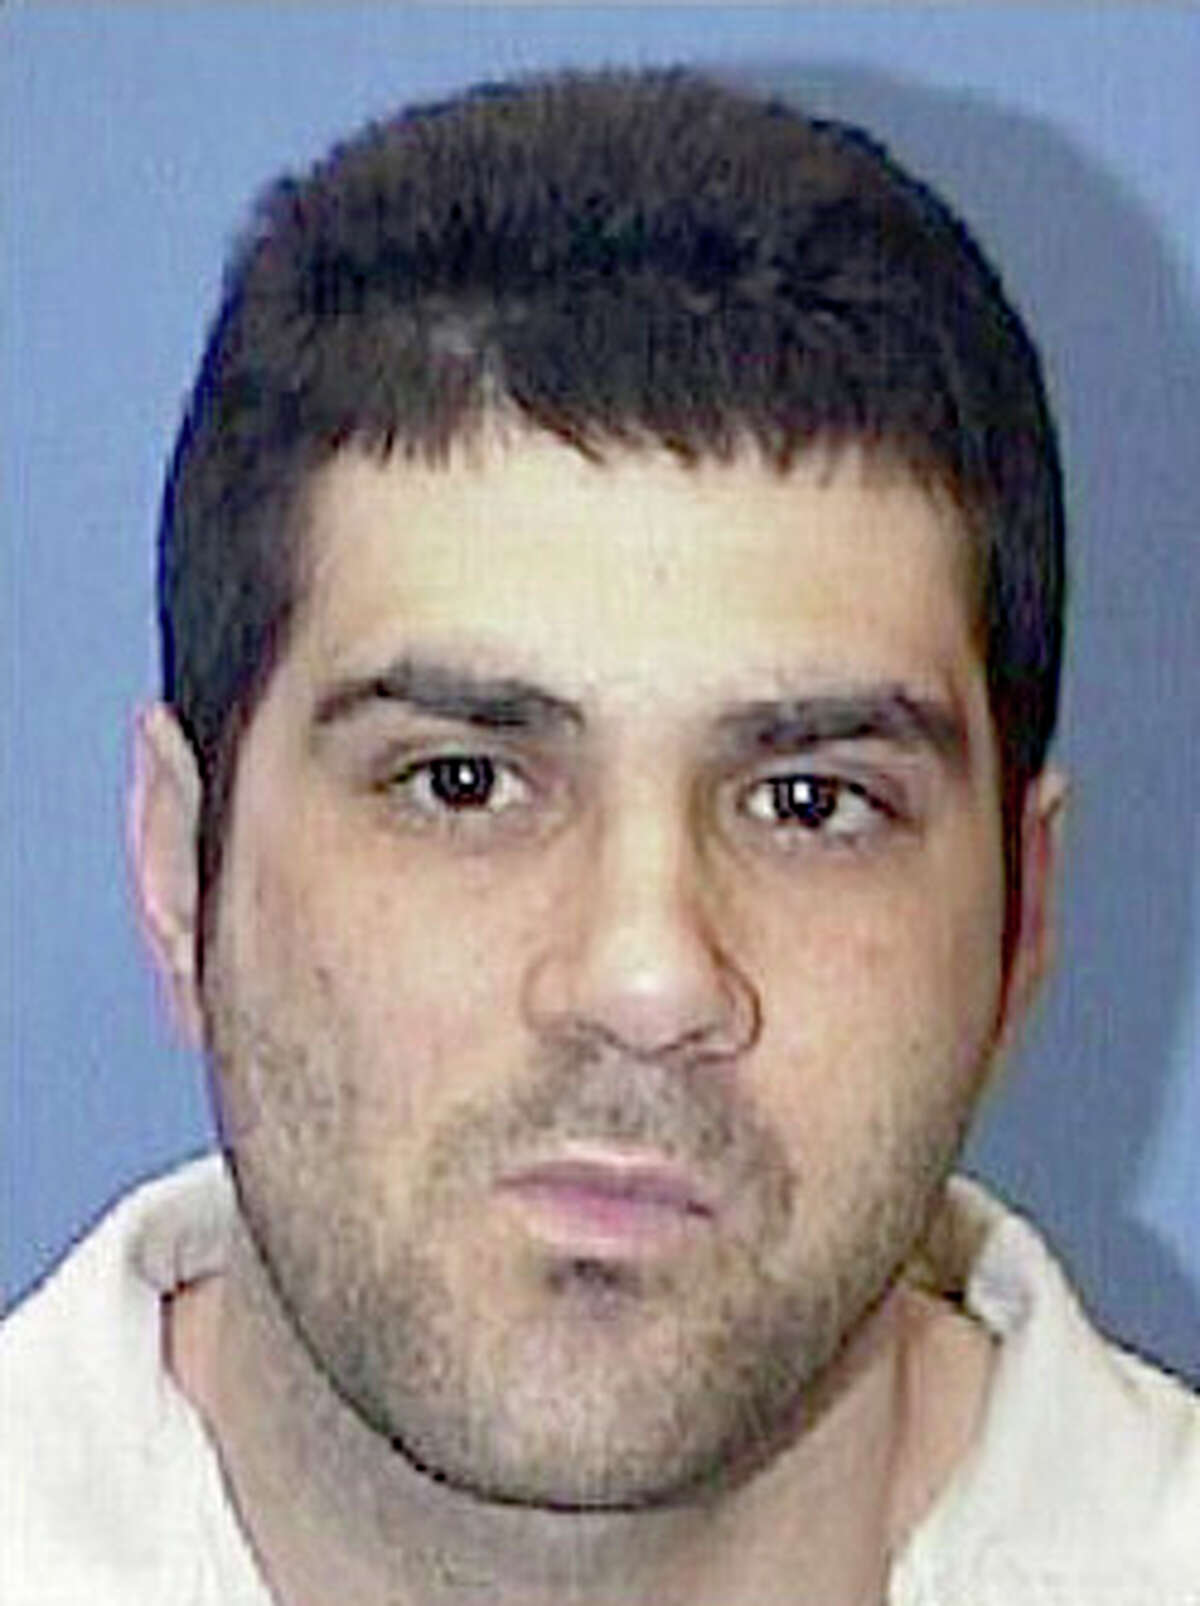 FILE - This undated file photo provided by the Texas Dept. of Criminal Justice shows Cameron Todd Willingham who was executed in 2004 for setting fire to his Corsicana house, killing his 2-year-old daughter and 1-year-old twins. The Innocence Project announced Monday, Aug. 4, 2014, that it has filed a state bar grievance against John H. Jackson, a former judge who prosecuted, Willingham who was controversially executed on Feb. 17, 2004. (AP Photo/Texas Department of Criminal Justice, File)